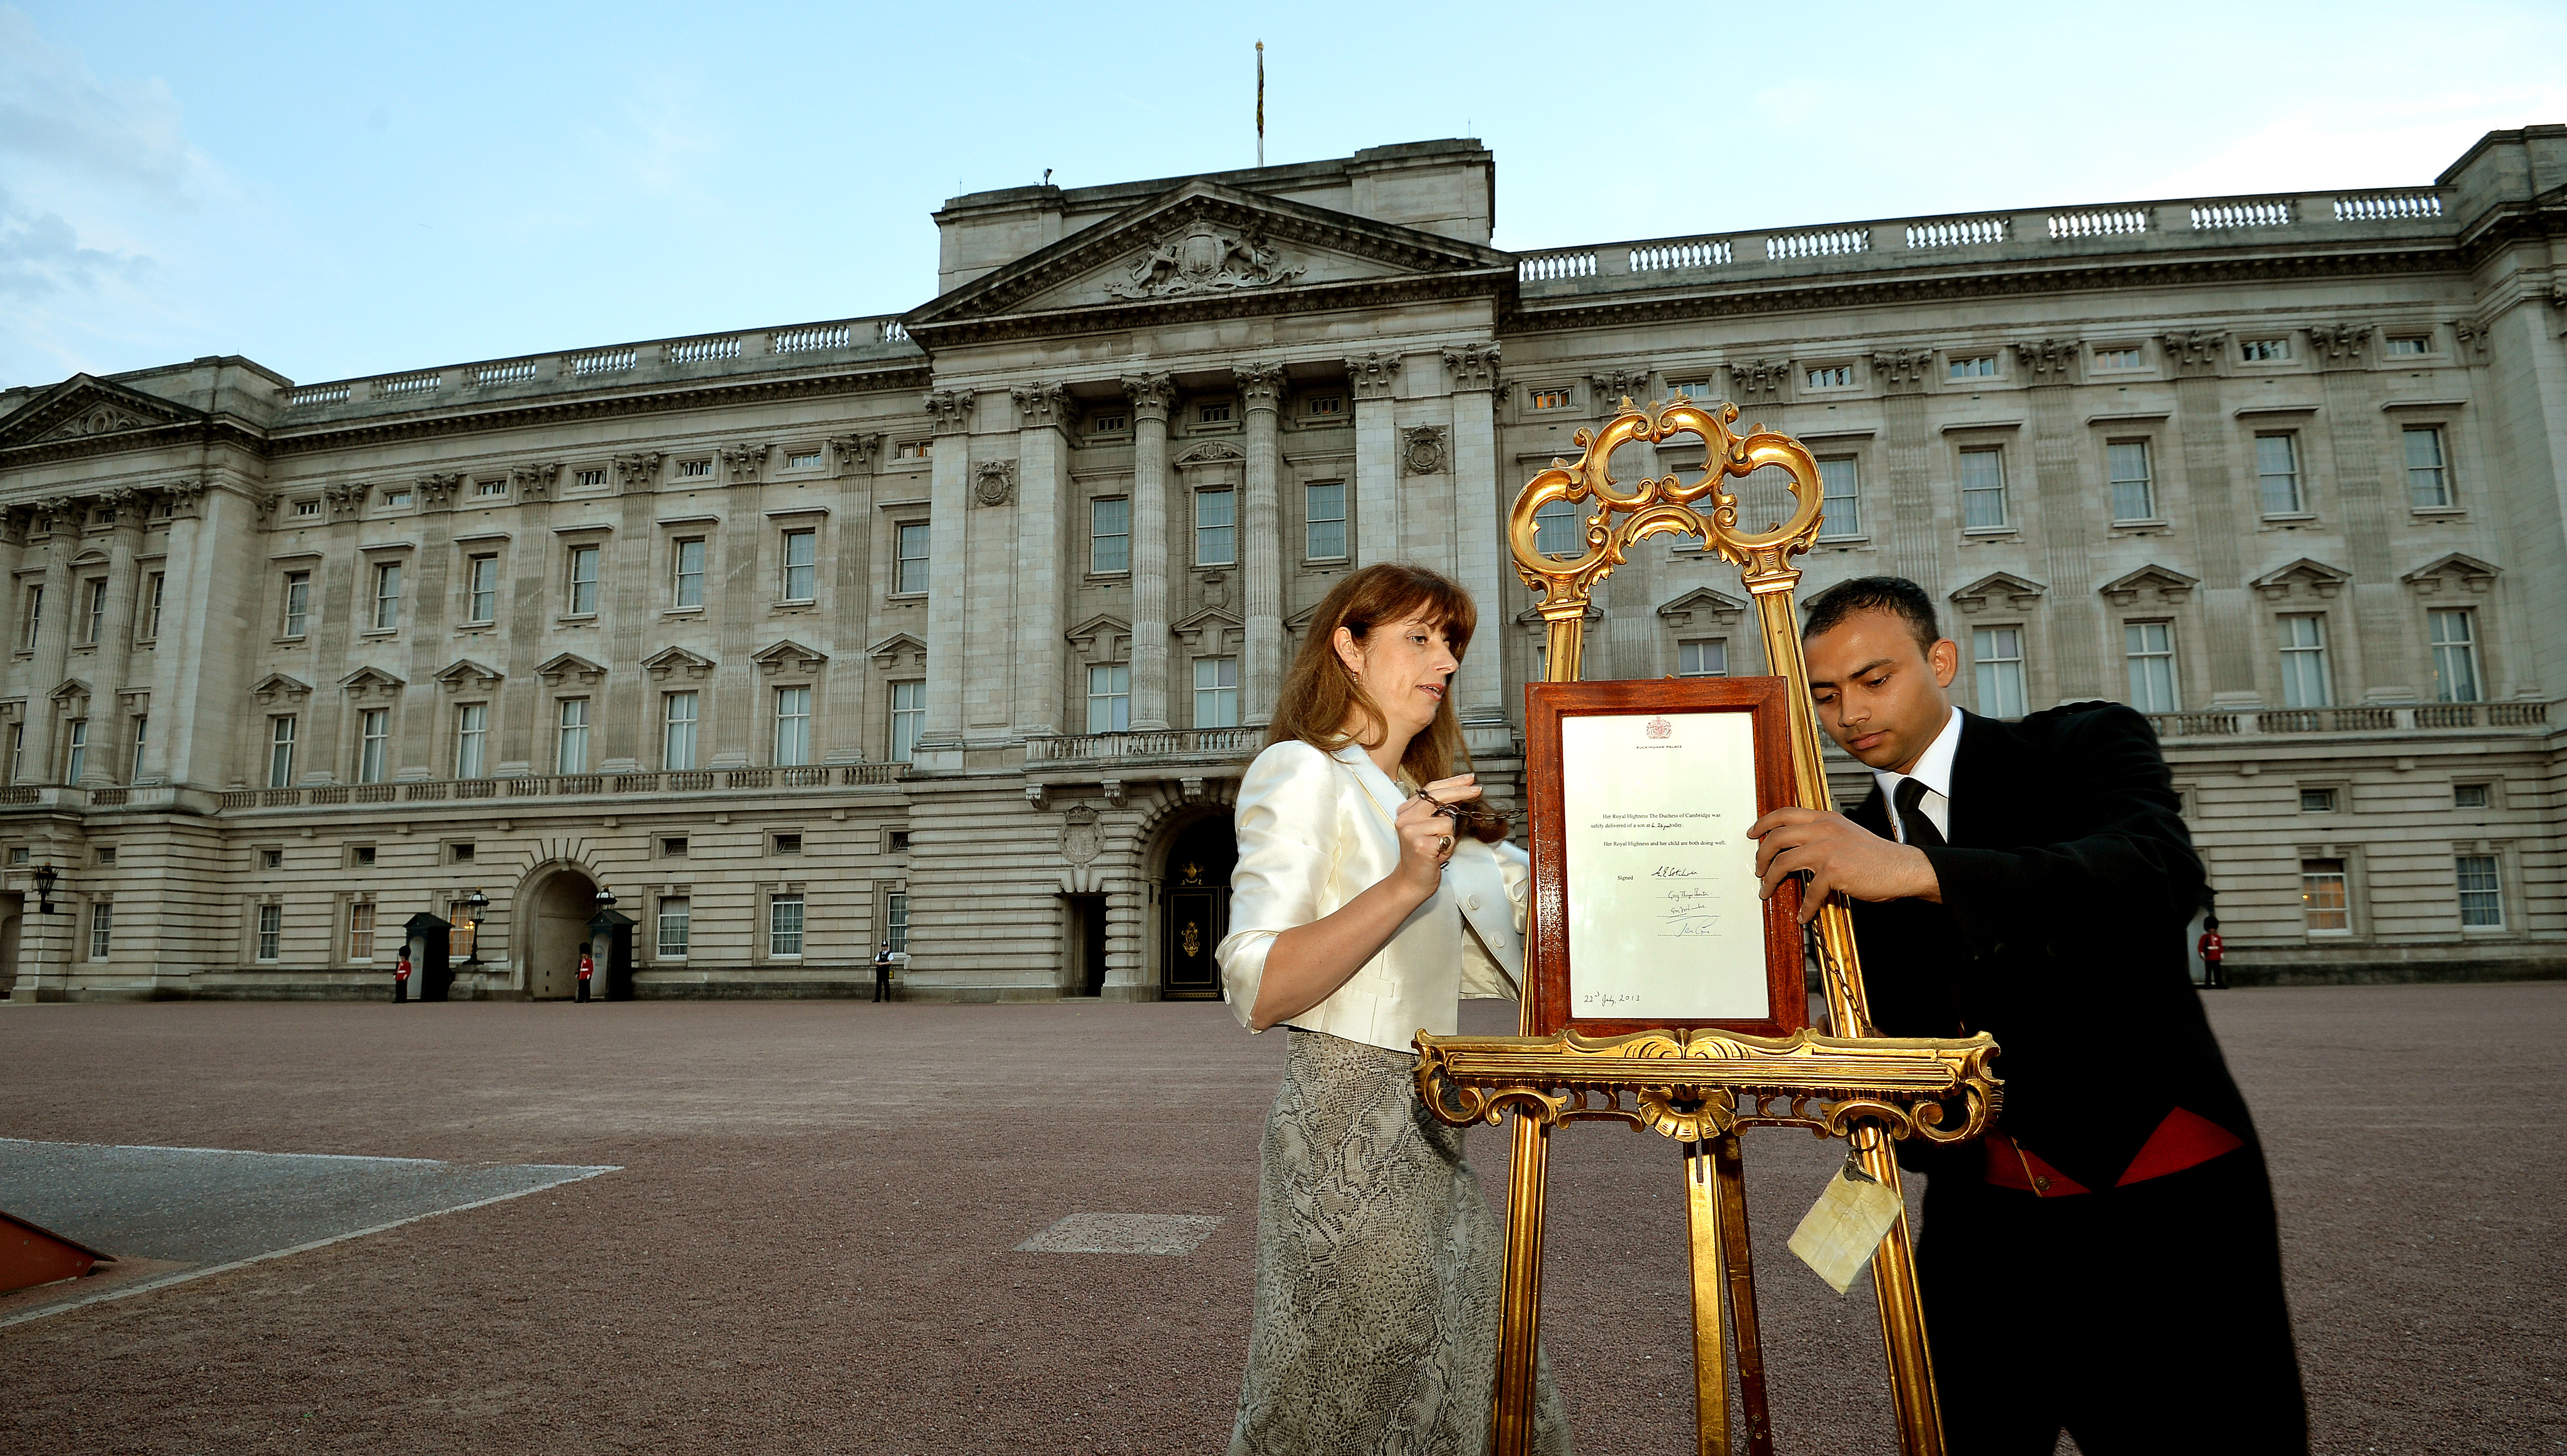 Ailsa Anderson with Badar Azim, a footman, place on an easel in the forecourt of Buckingham Palace a notification to announce the birth of Prince George on July 22, 2013 | Source: Getty Images